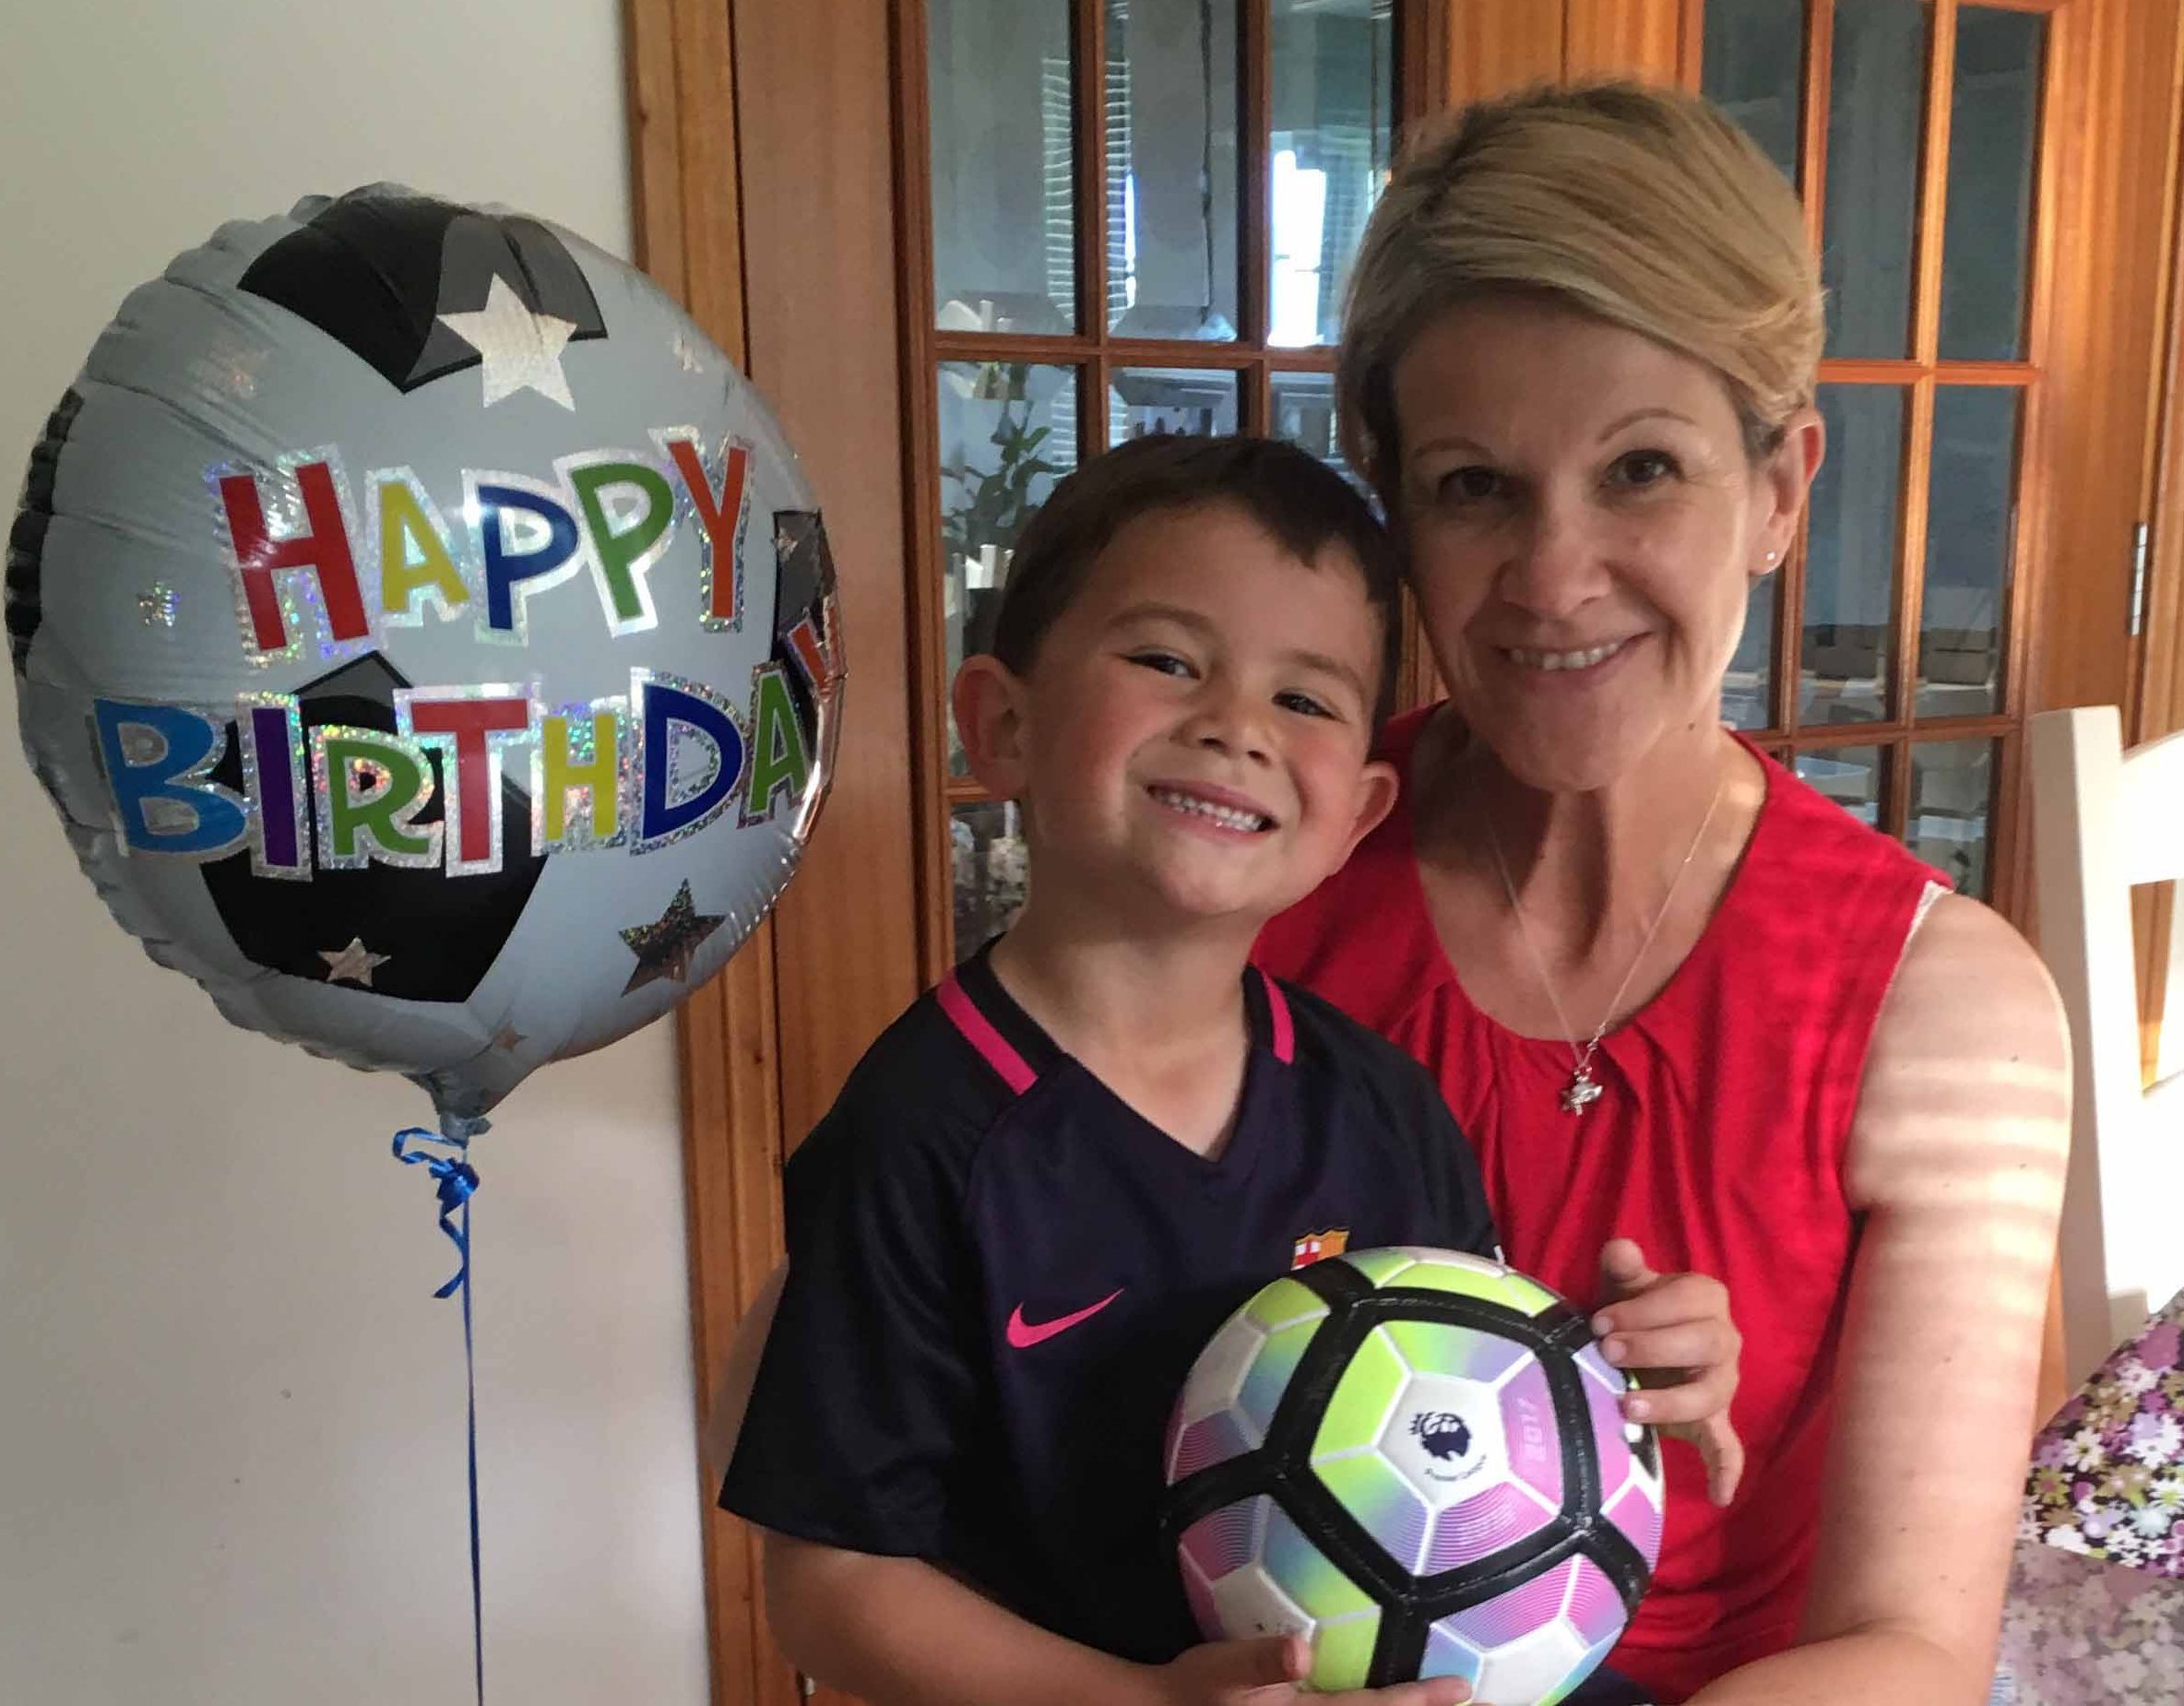 Anne Macleod Chang with her son Oliver, who is celebrating his sixth birthday